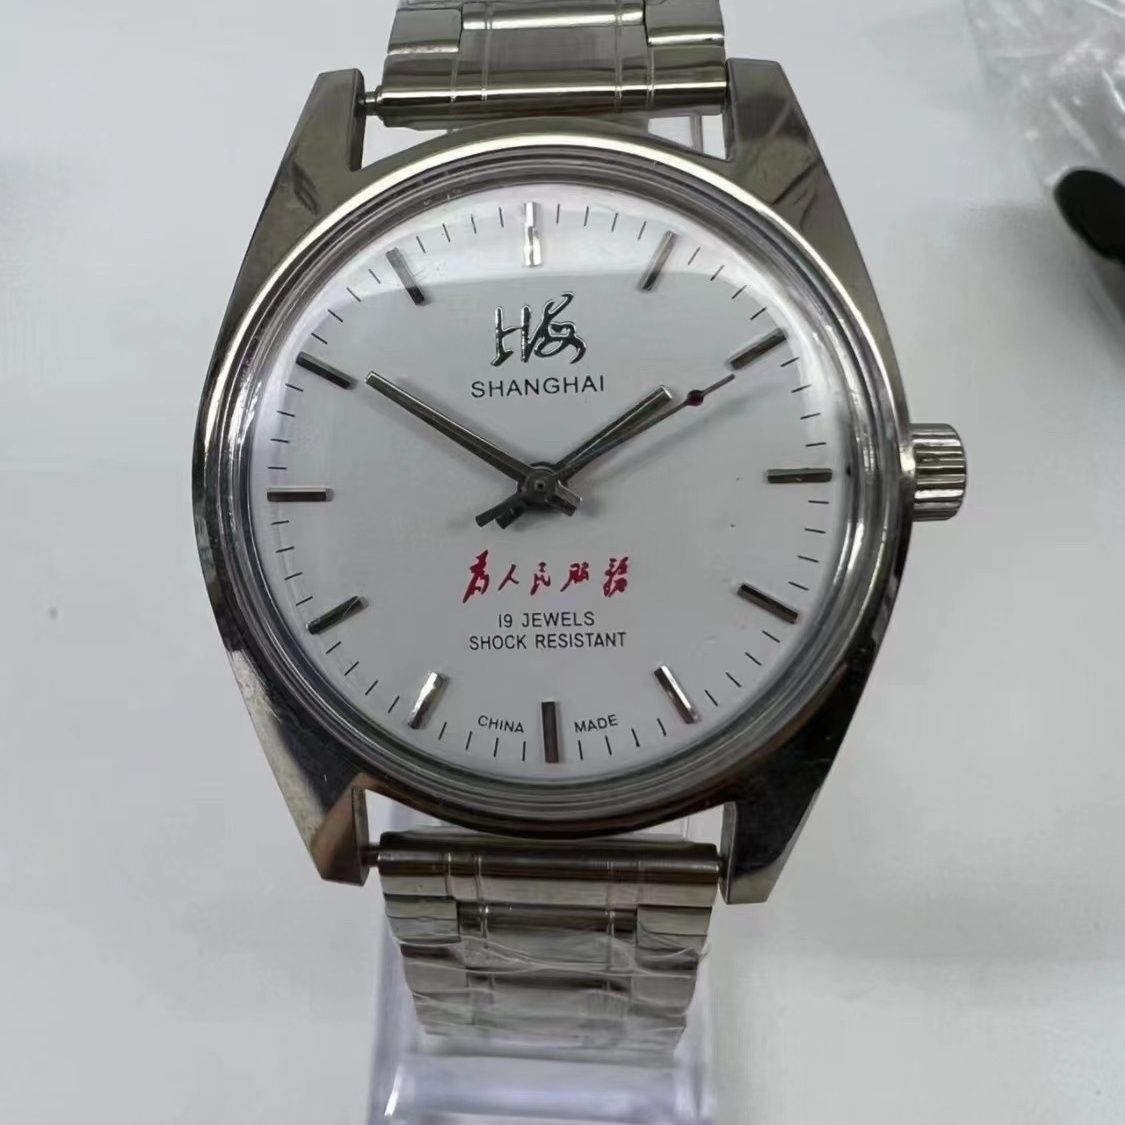 38mm Shanghai Factory Made Manual Mechanical Watch White Dial 3 Hands 19  Jews | eBay